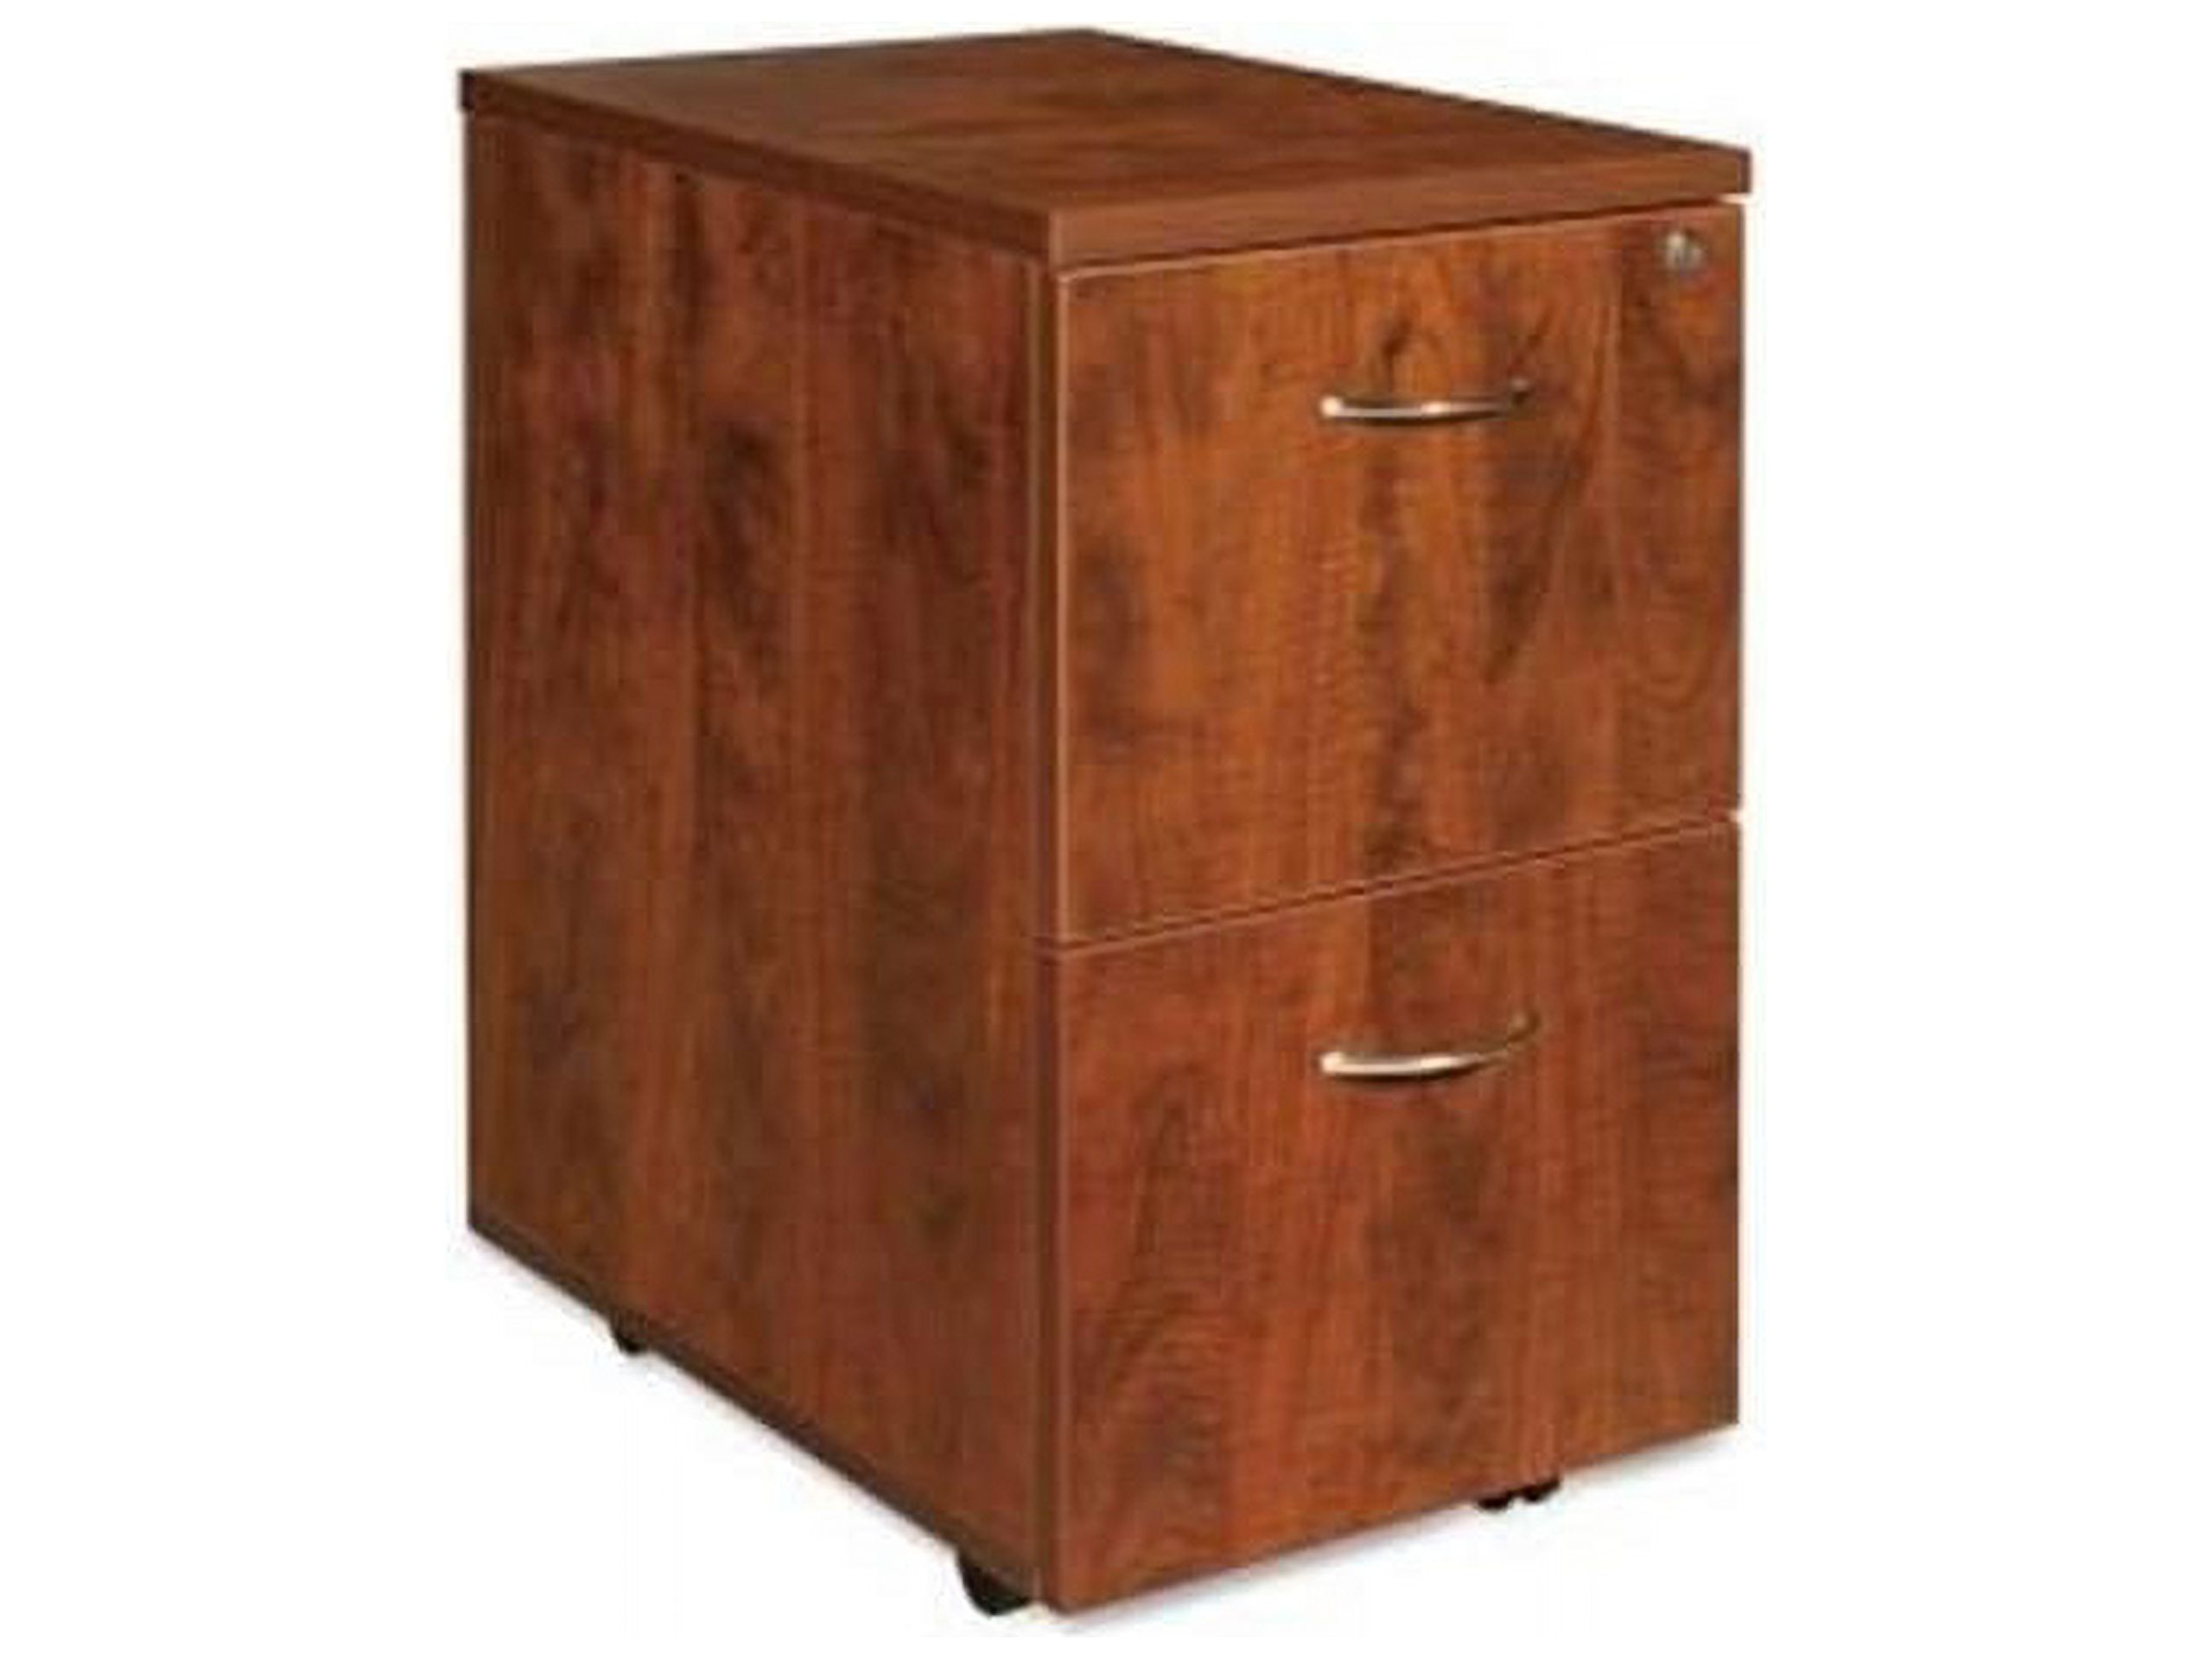 2 Drawers Vertical Wood Composite Lockable Filing Cabinet, Cherry, Letter-Size - image 2 of 14